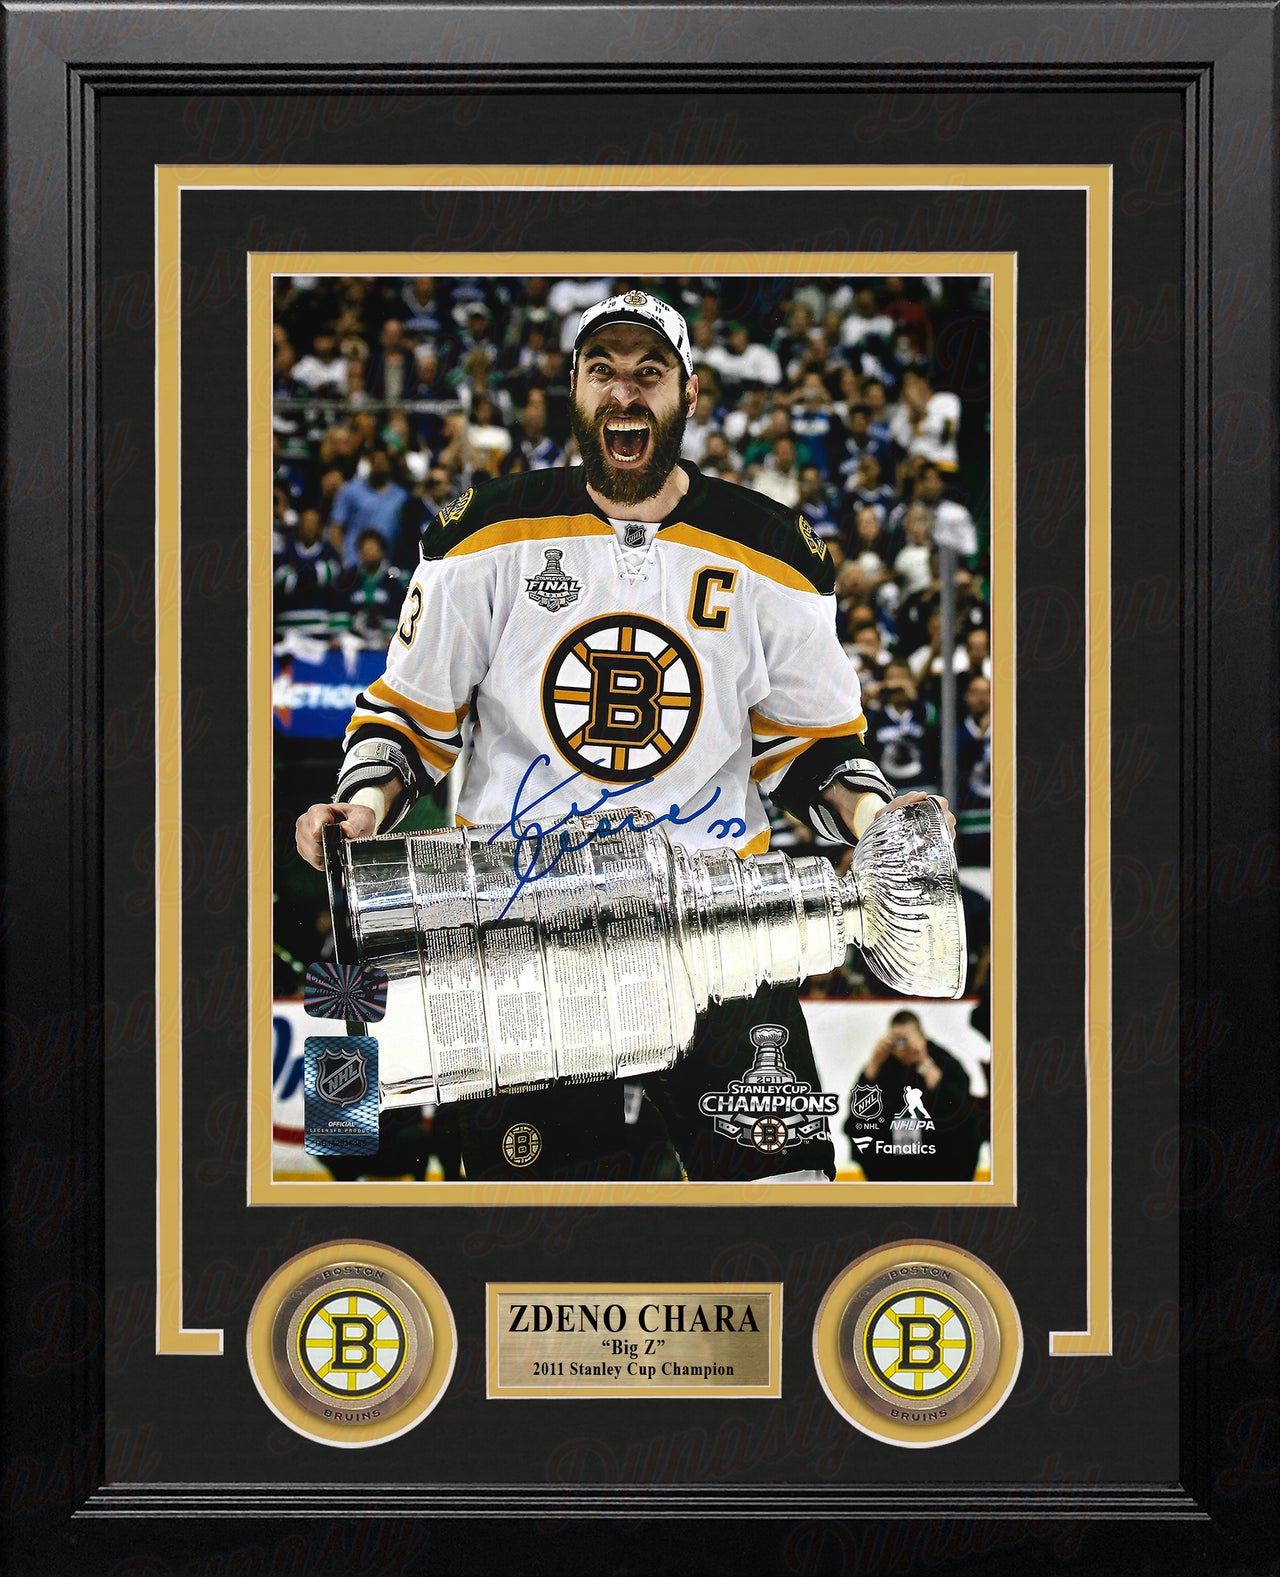 Zdeno Chara 2011 Stanley Cup Boston Bruins Autographed Framed Hockey Photo - Dynasty Sports & Framing 